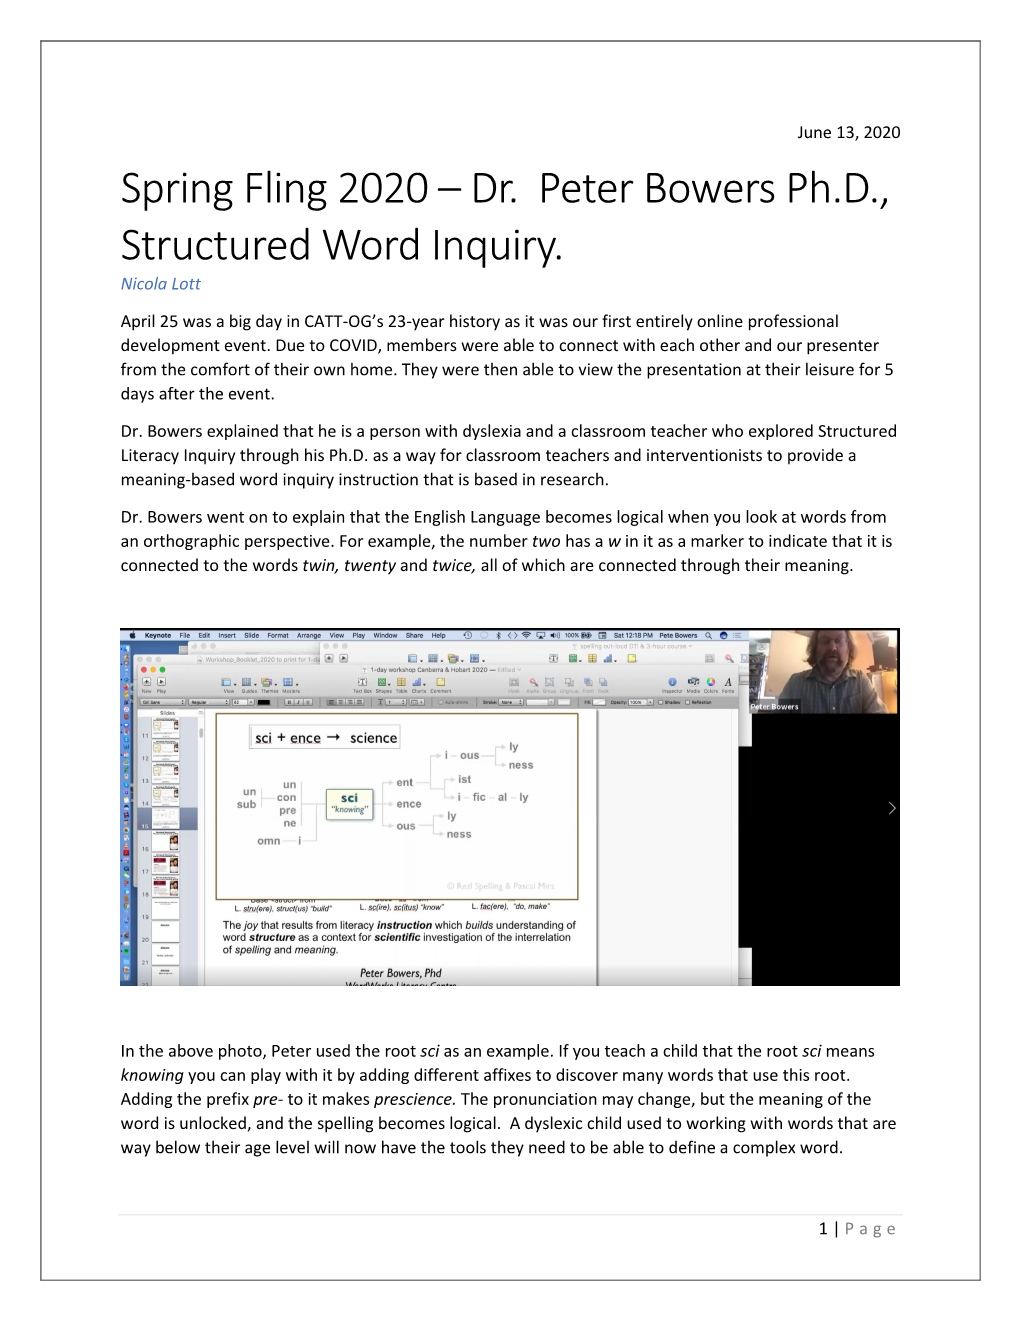 Spring Fling 2020 – Dr. Peter Bowers Ph.D., Structured Word Inquiry. Nicola Lott